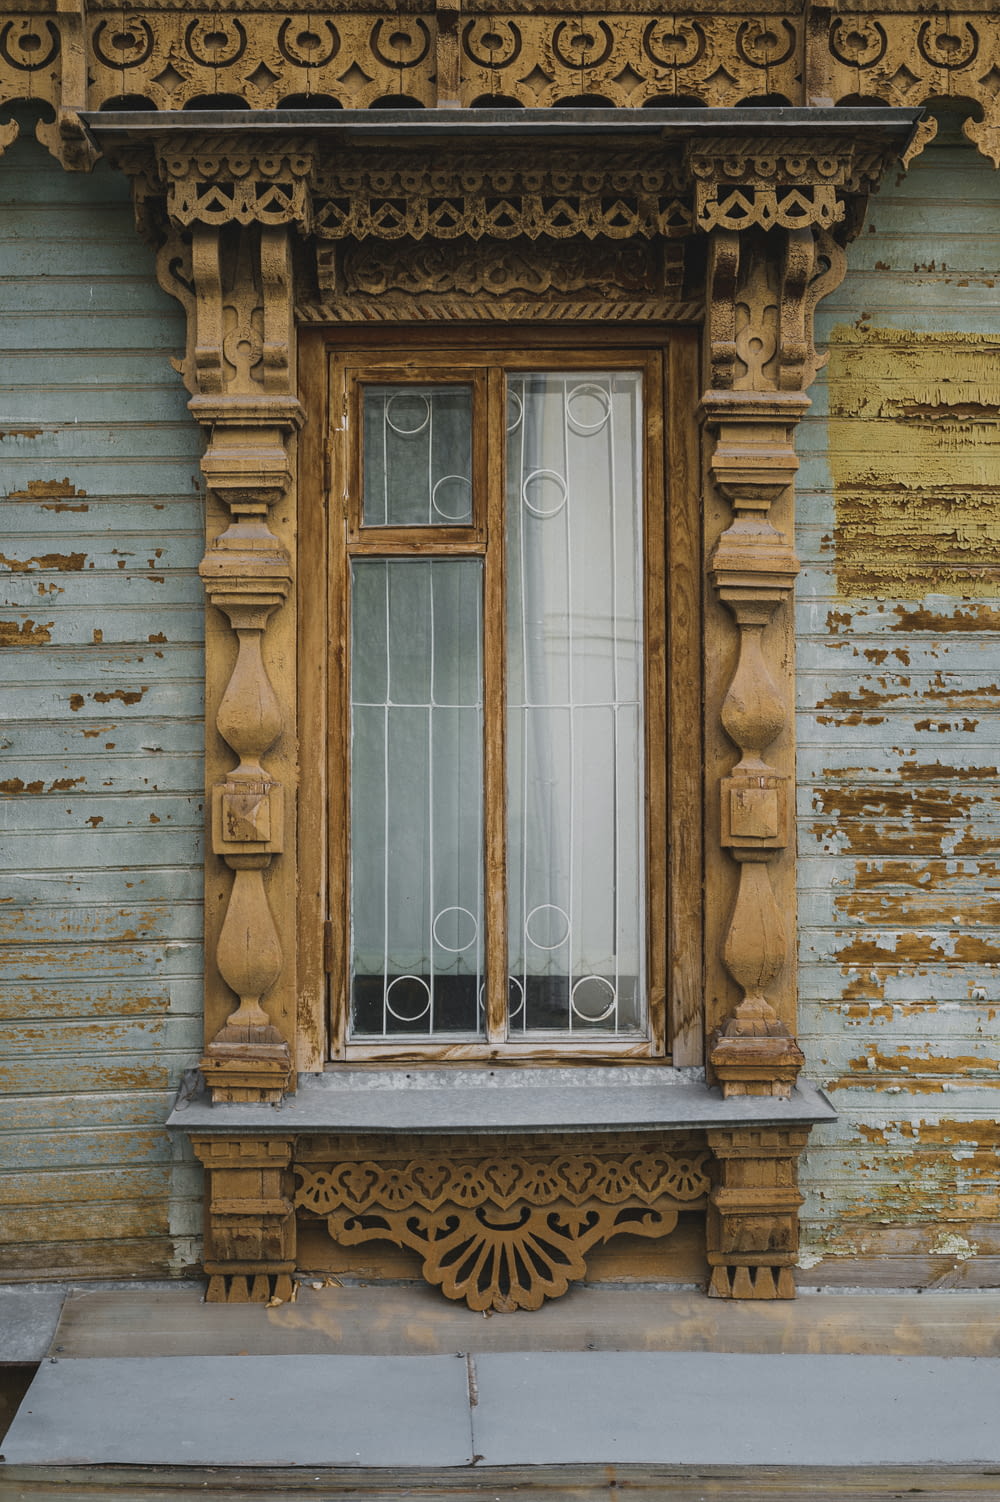 a wooden window on the side of a building